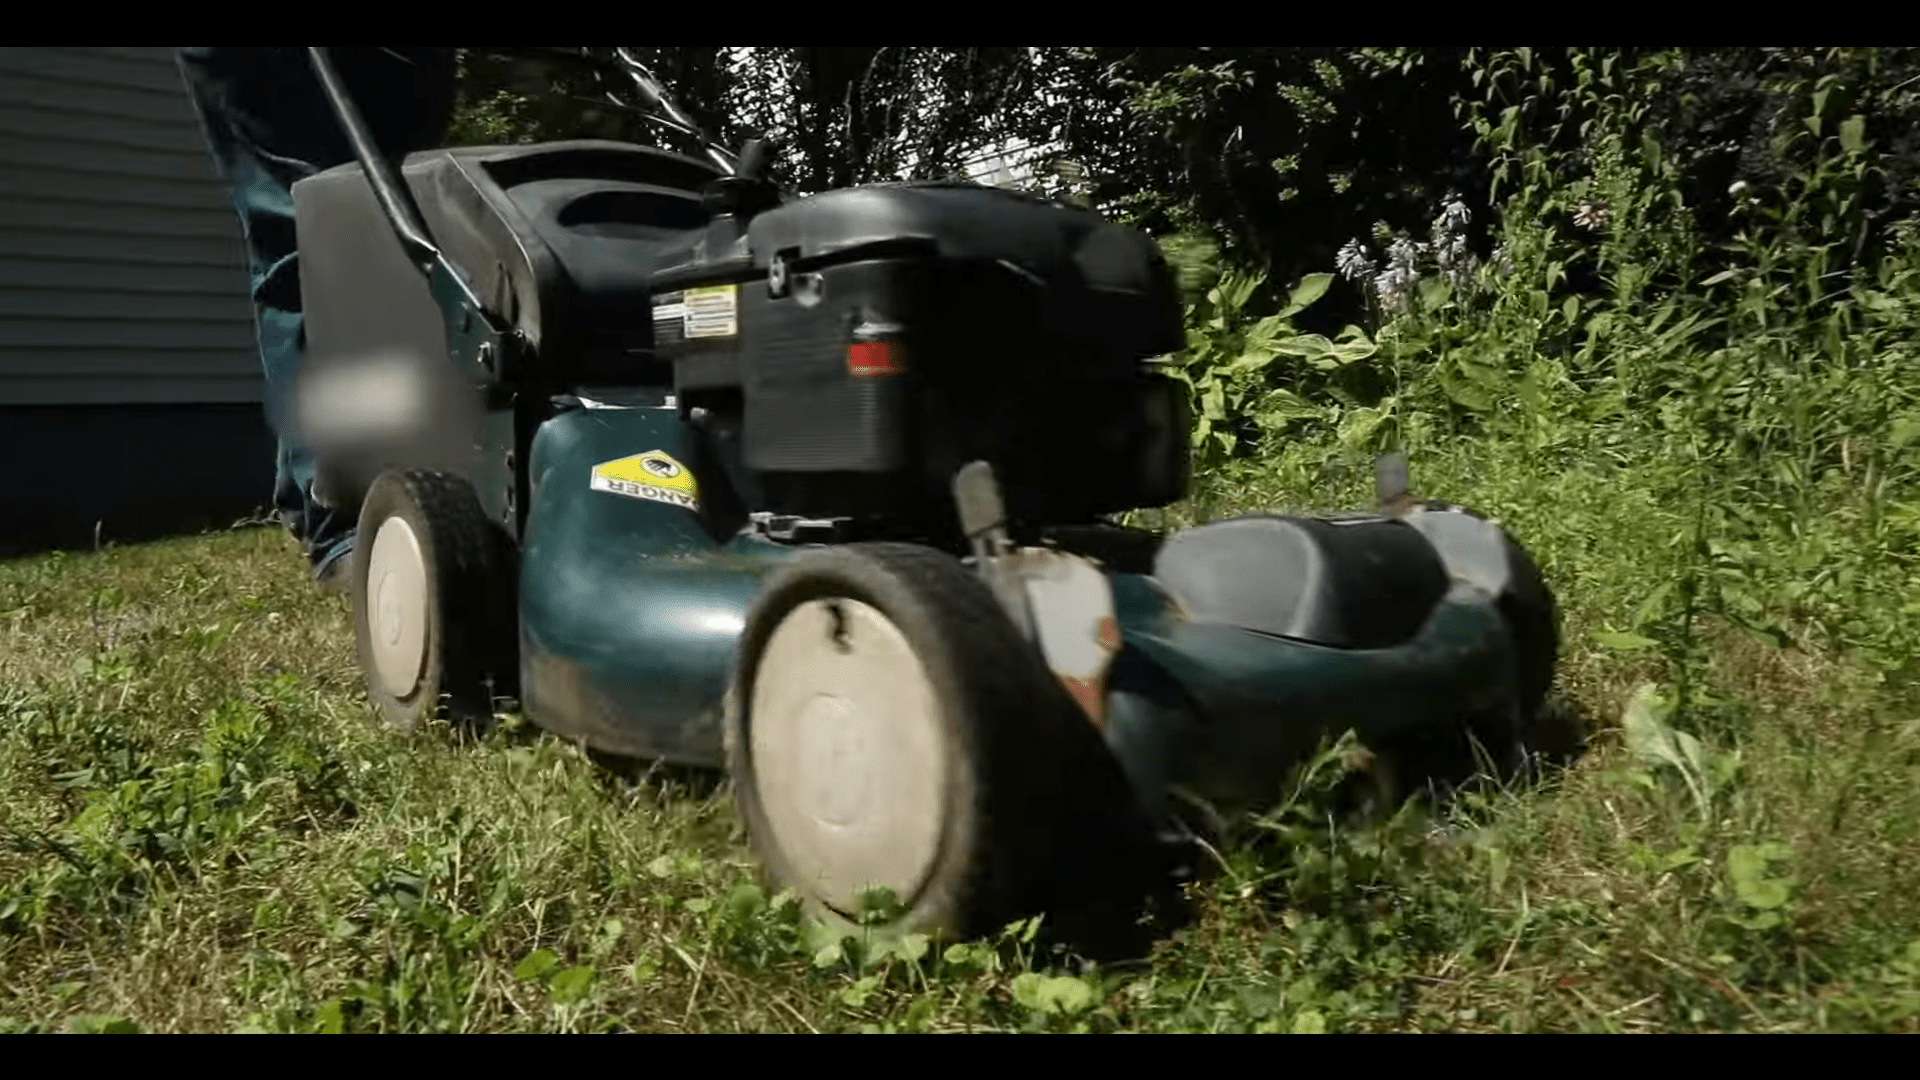 Gas-powered lawn mowers do need maintenance more often for oil and fuel changes but in some ways is cheaper than electric